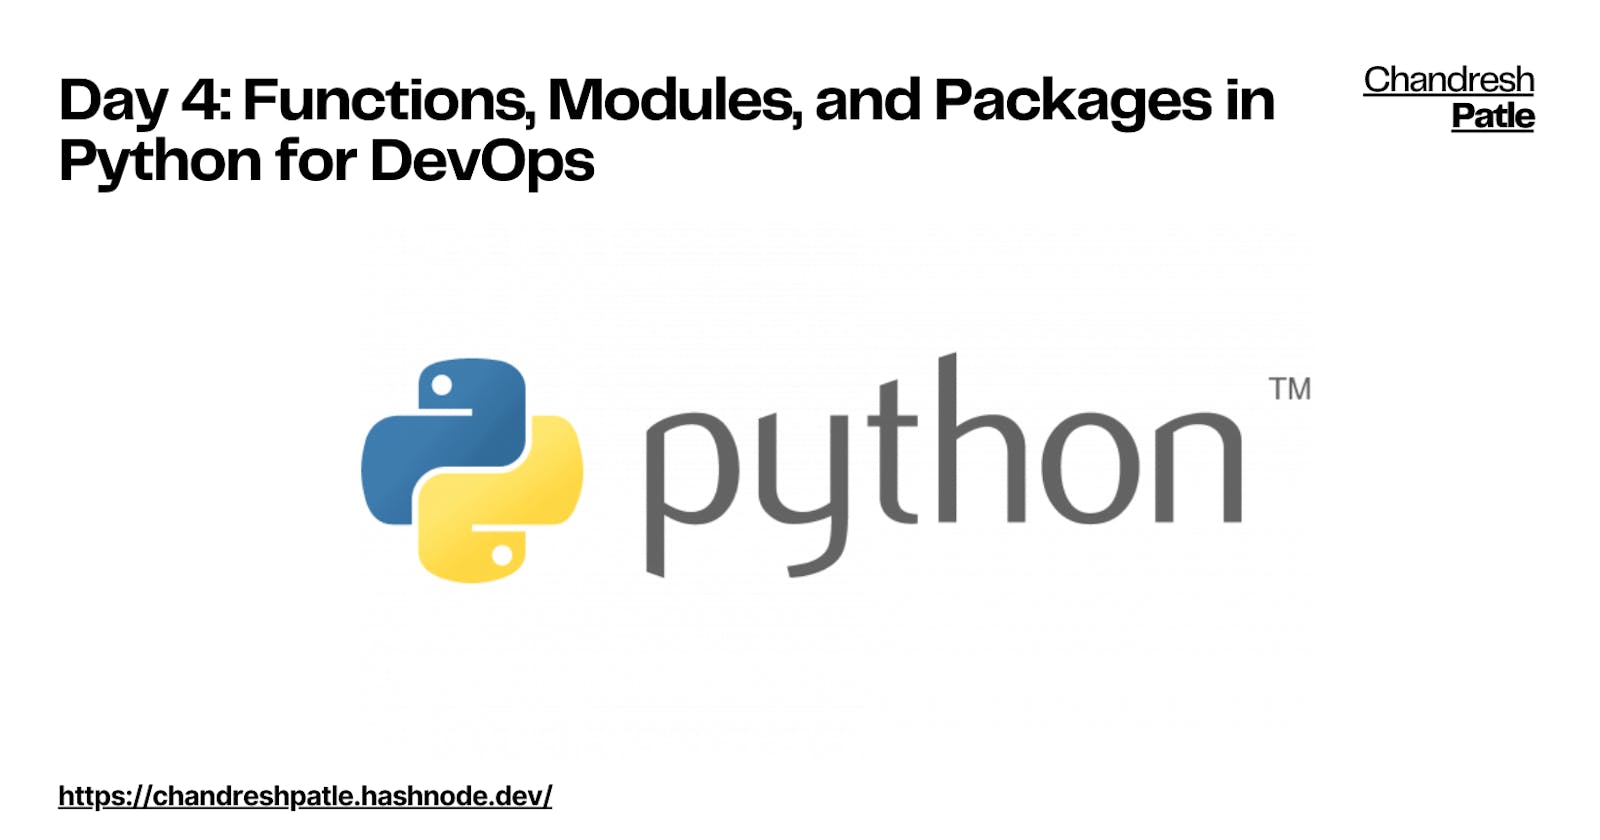 Day 4: Functions, Modules, and Packages in Python for DevOps